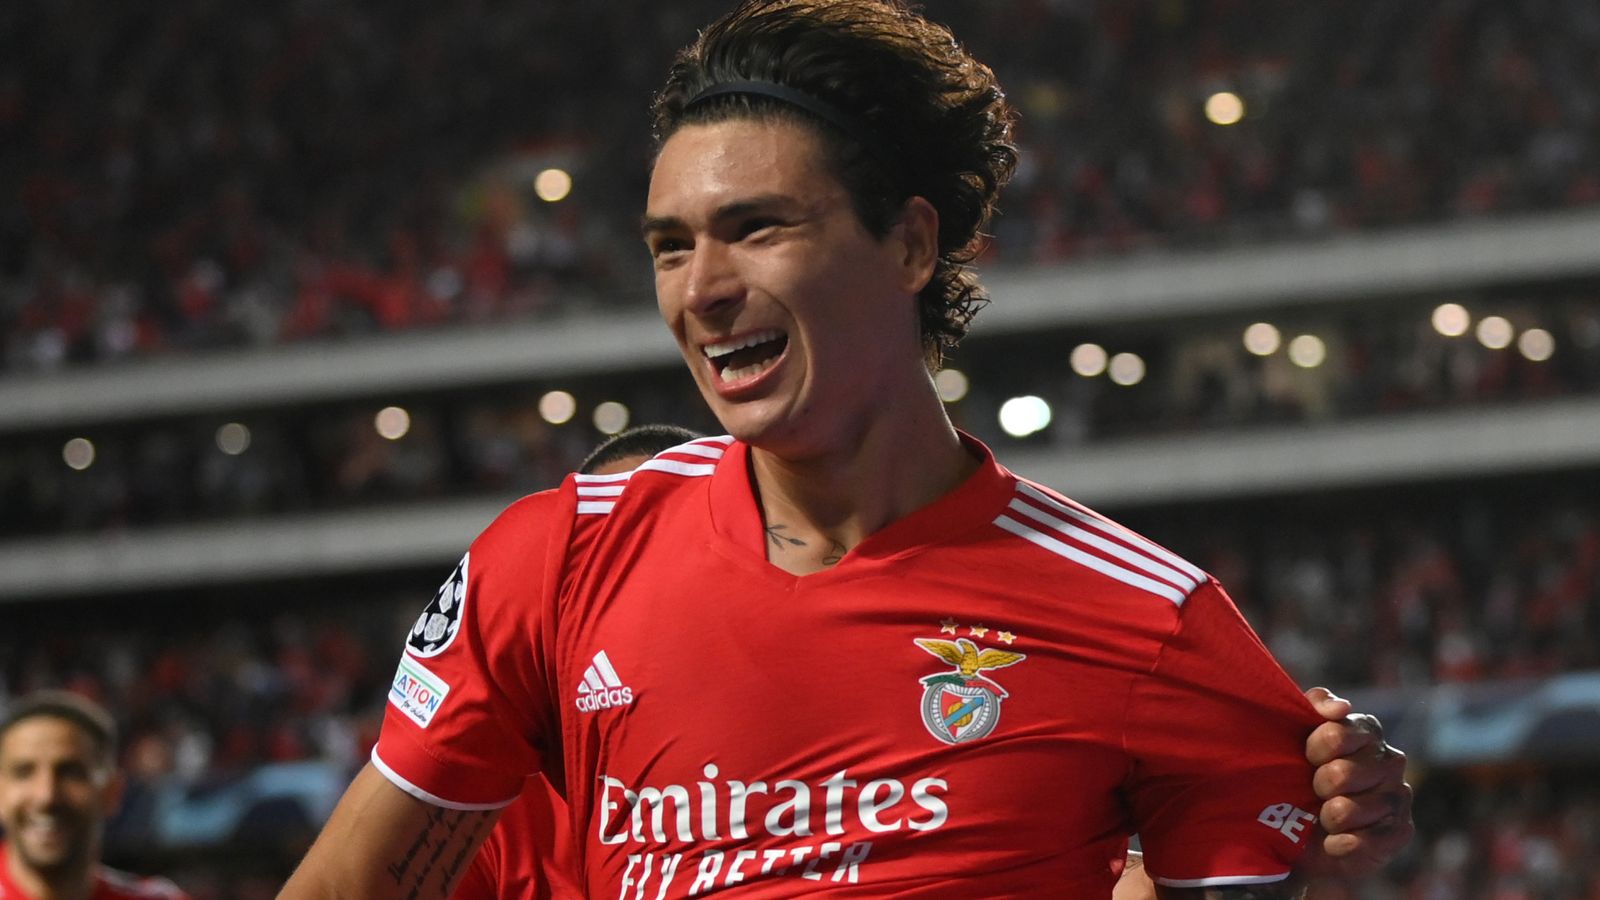 Darwin Nunez: West Ham hoping to complete move for Benfica striker